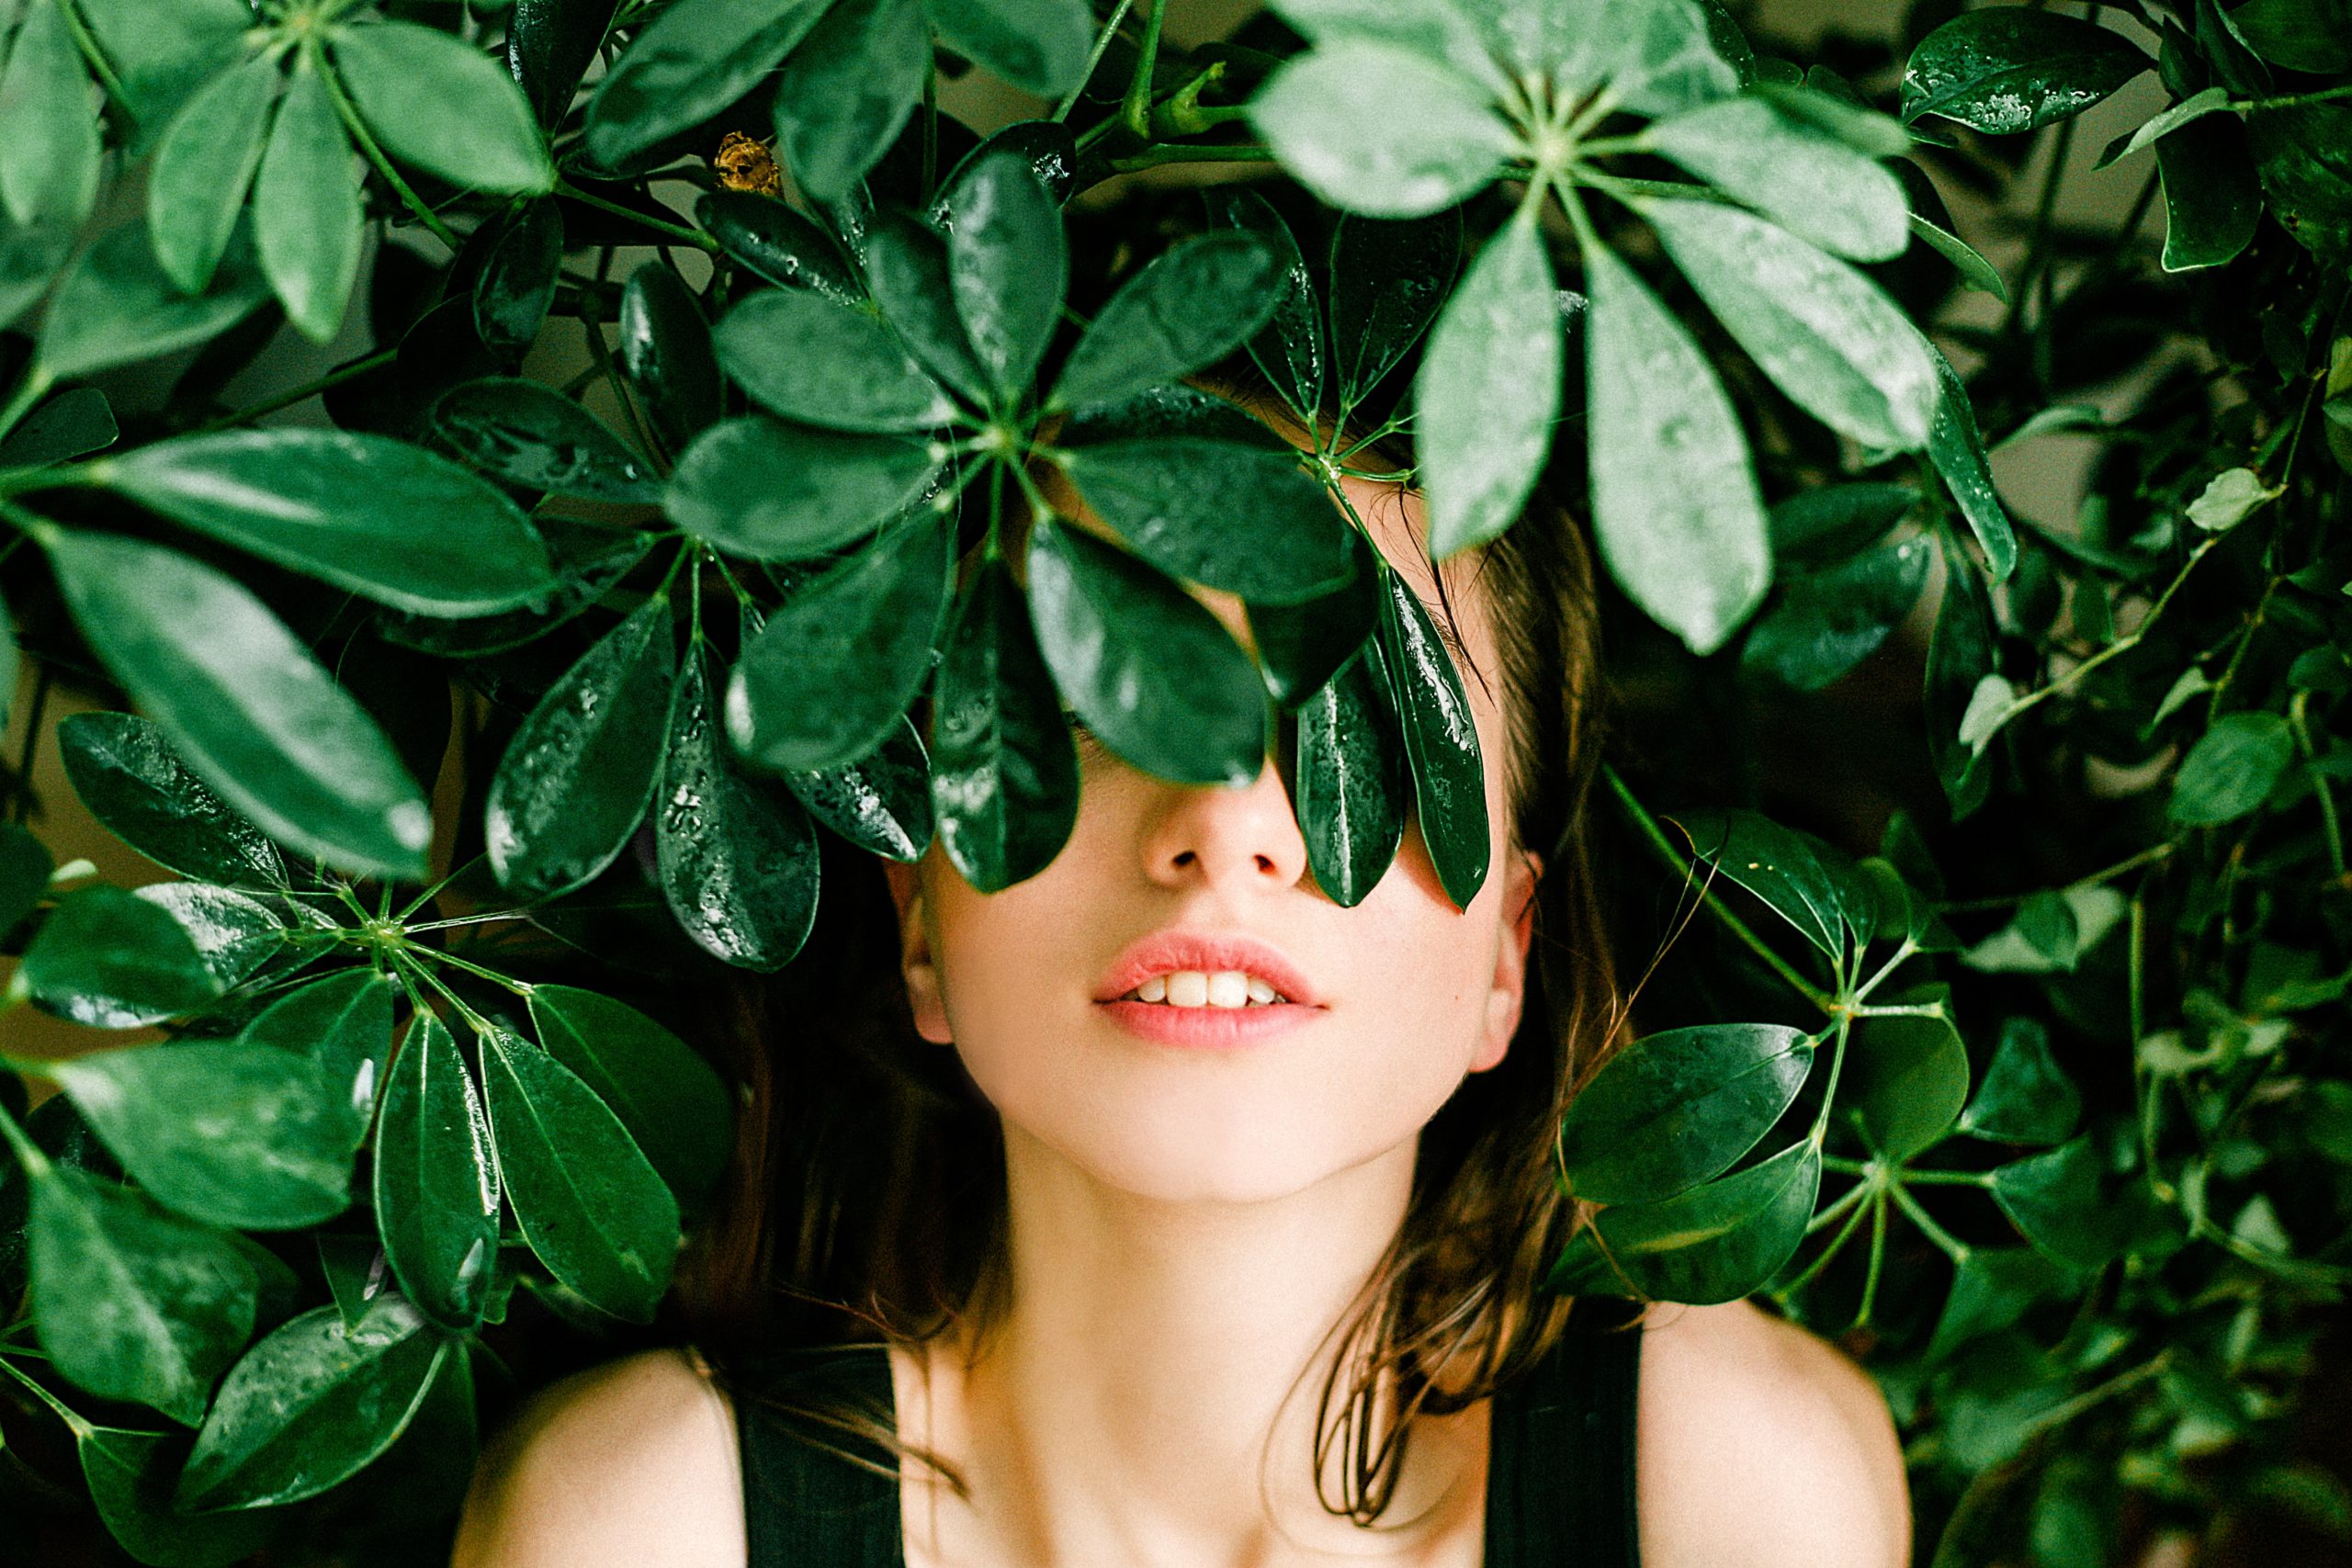 Woman in Black Top Beside Green Leafed Plant